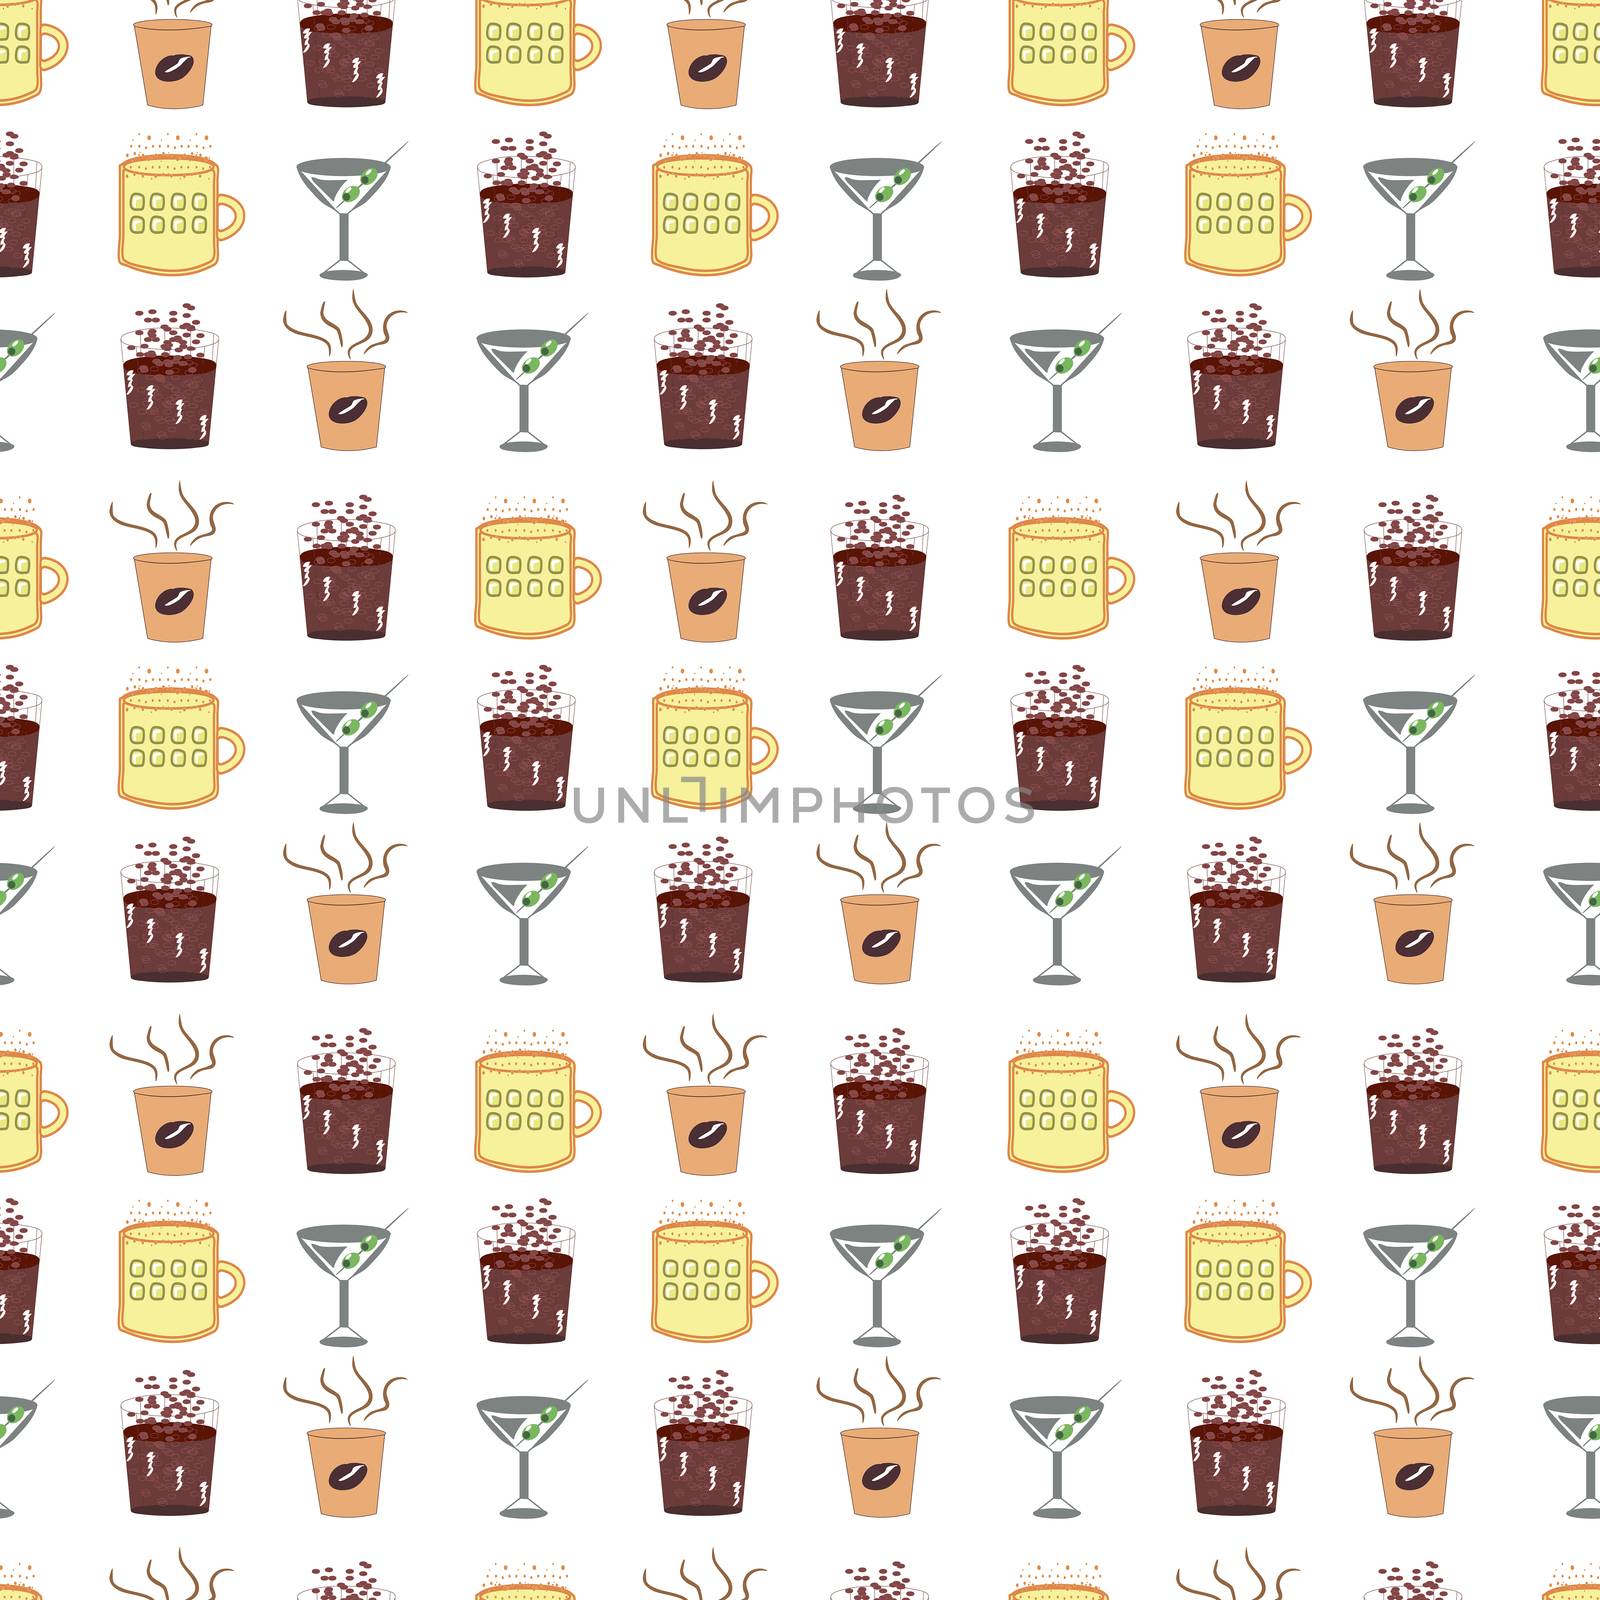 Drinks pattern -  Set of Cola, Beer, Martini and Coffee